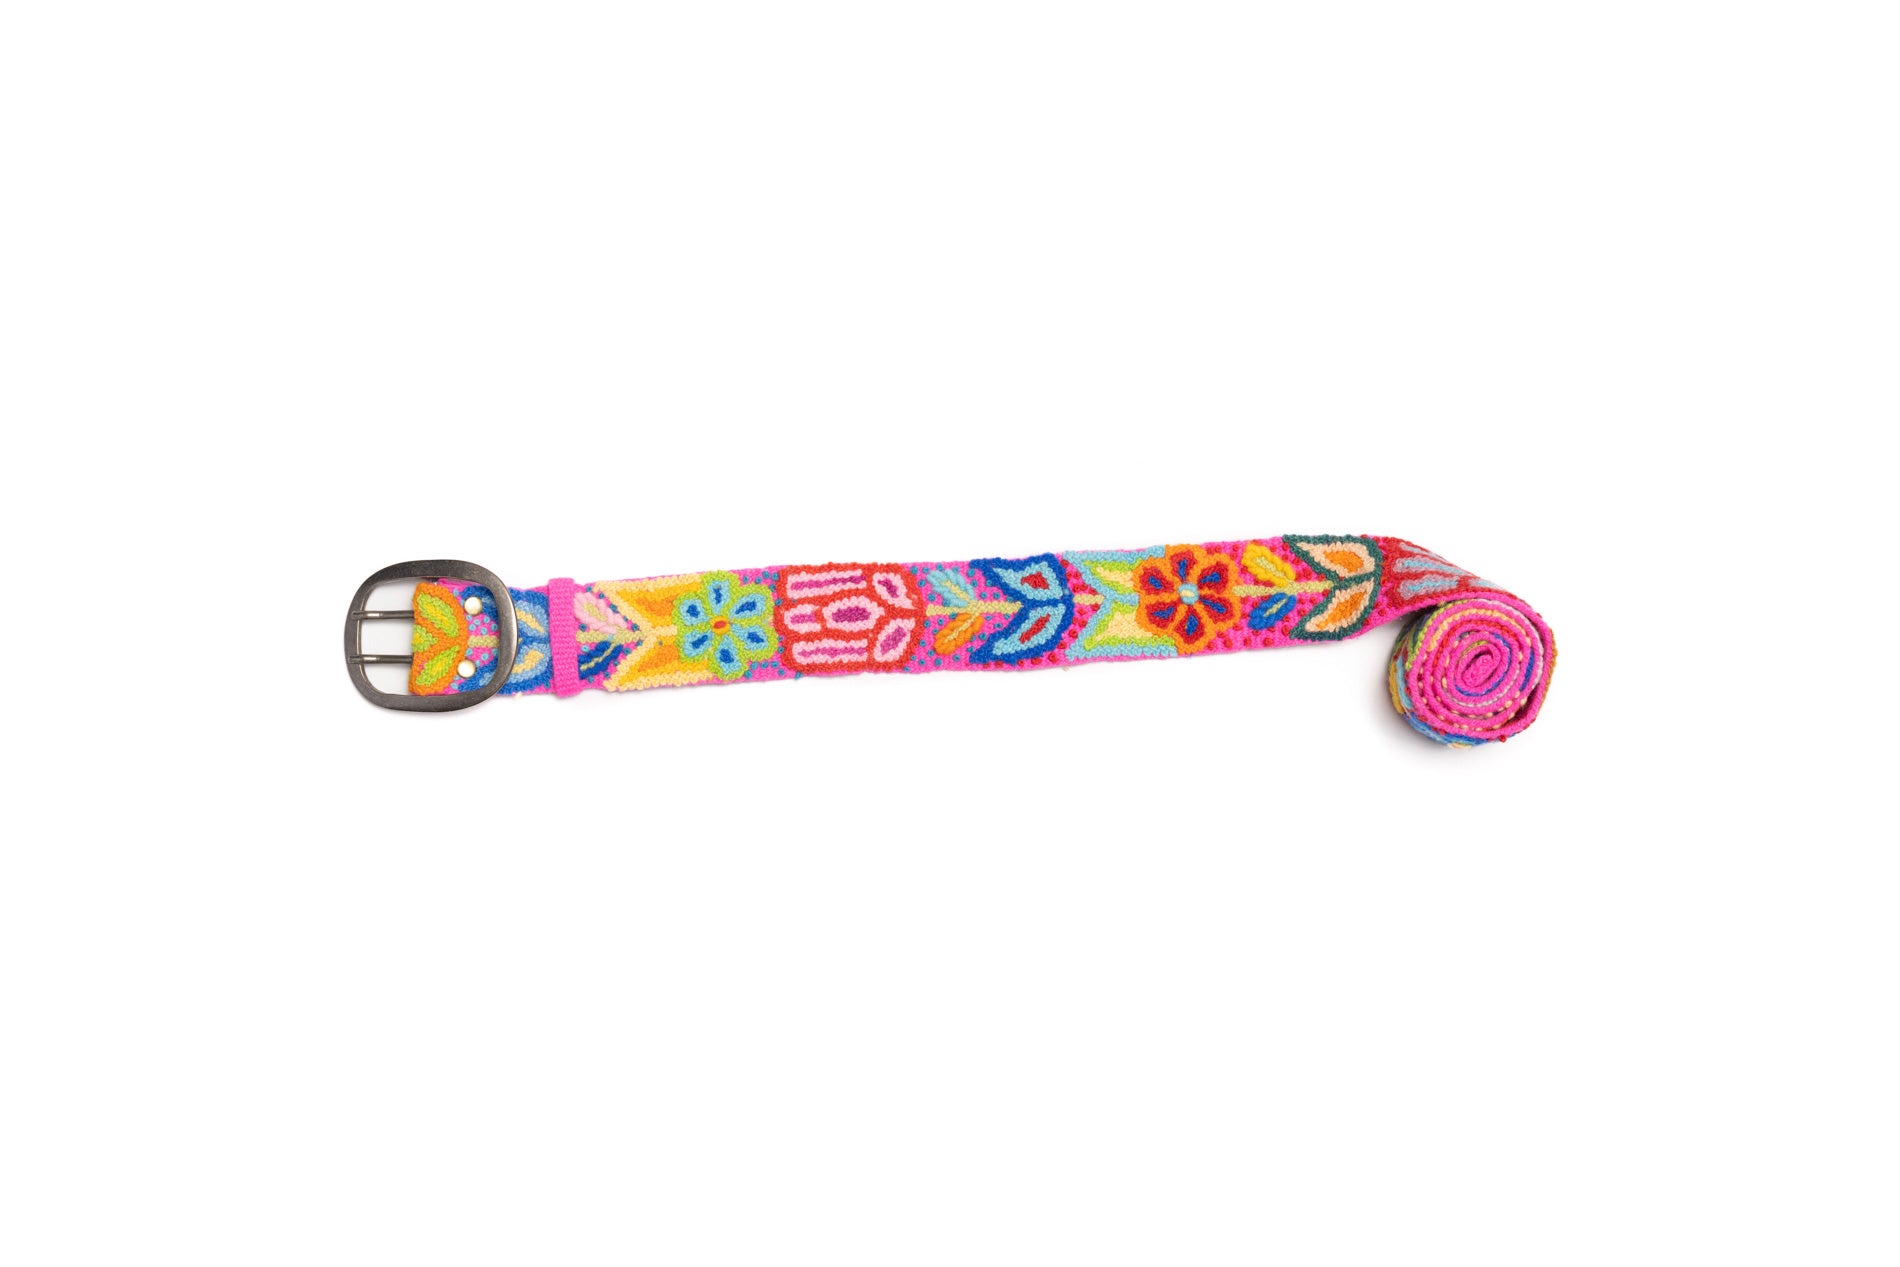 Hot Pink Embroidered Belt with Colorful Floral Pattern